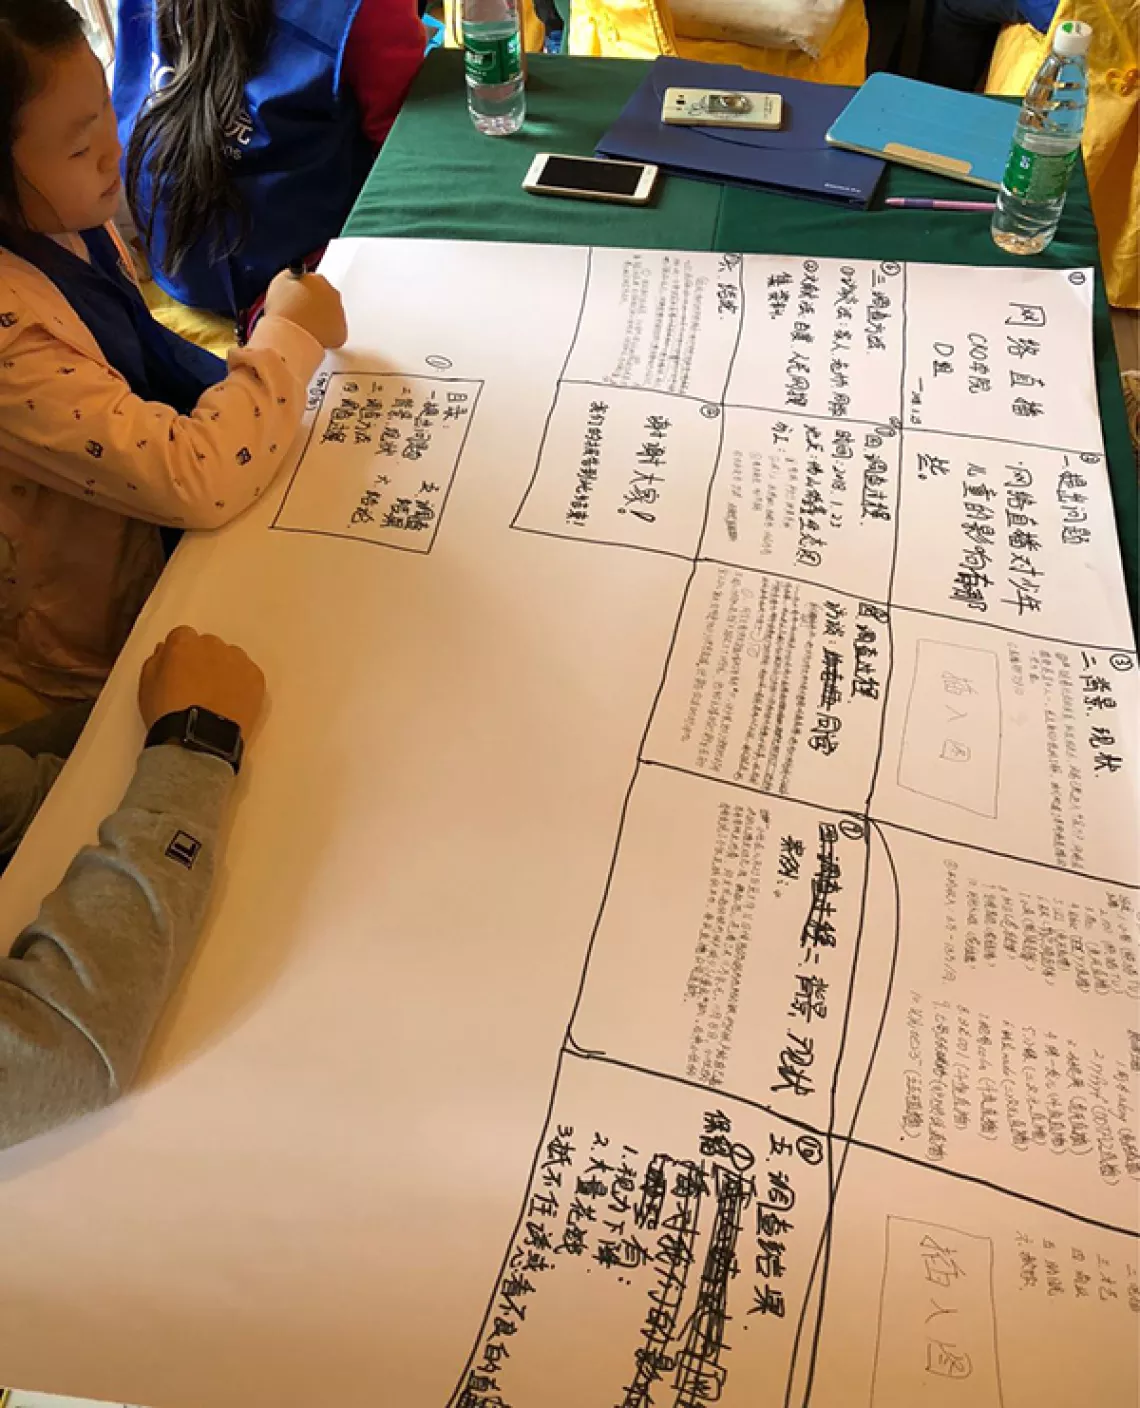 Child Researchers at the Children's Internet Conference in Guangzhou, China write their reports in groups.